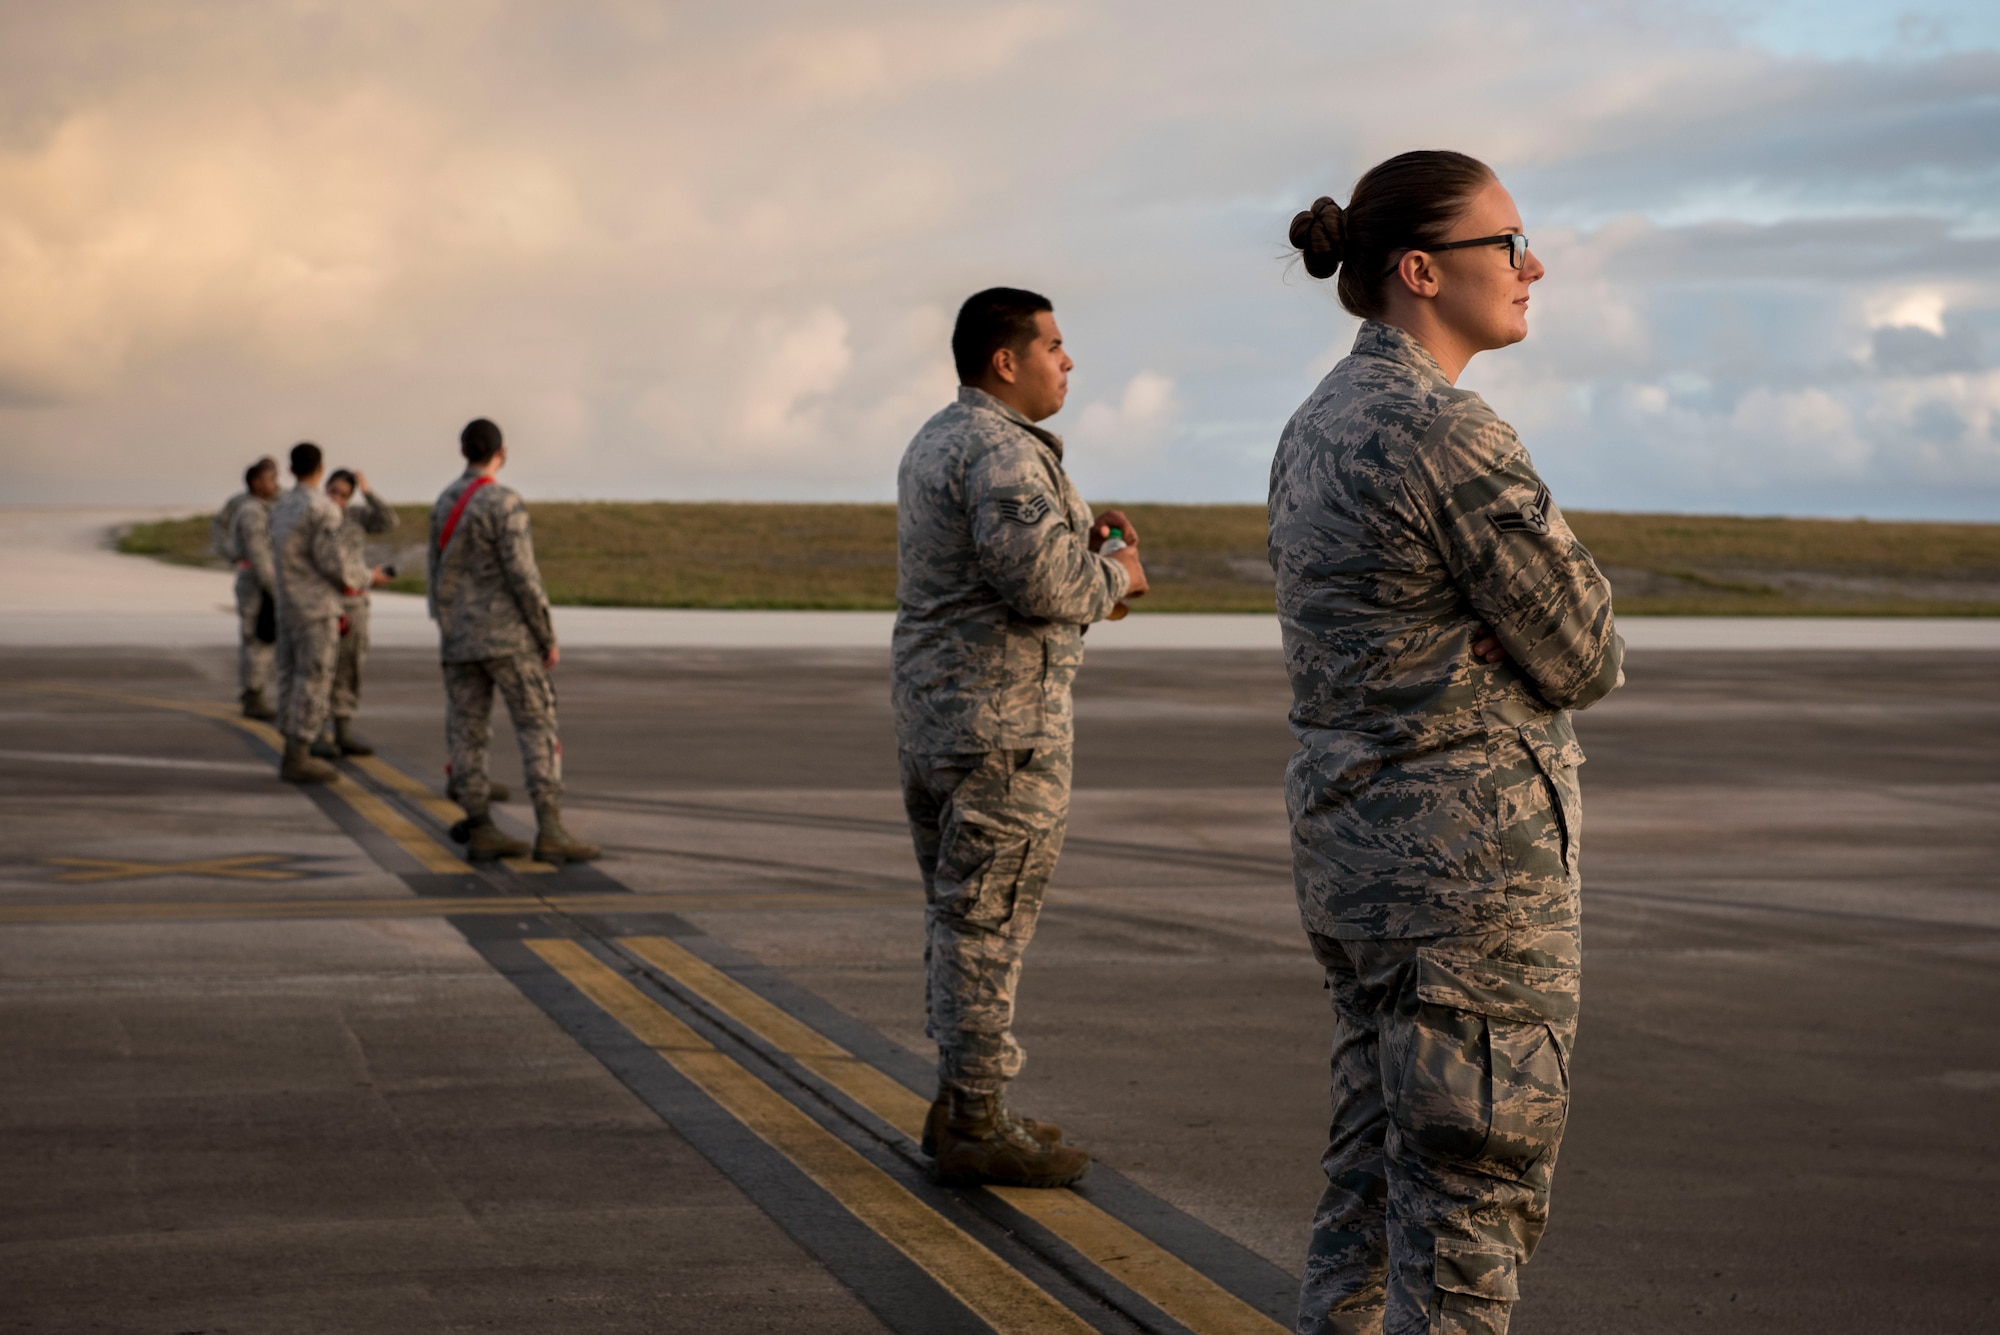 U.S. Air Force Airmen from the 67th Aircraft Maintenance Squadron form up before conducting a foreign object debris walk Feb, 23, 2017 on the flightline of Andersen Air Force Base, Guam. The 67th AMU flew from Kadena Air Base, Japan, to support one of the 22 flying units participating in annual exercise Cope North.  (U.S. Air Force photo by Senior Airman John Linzmeier)